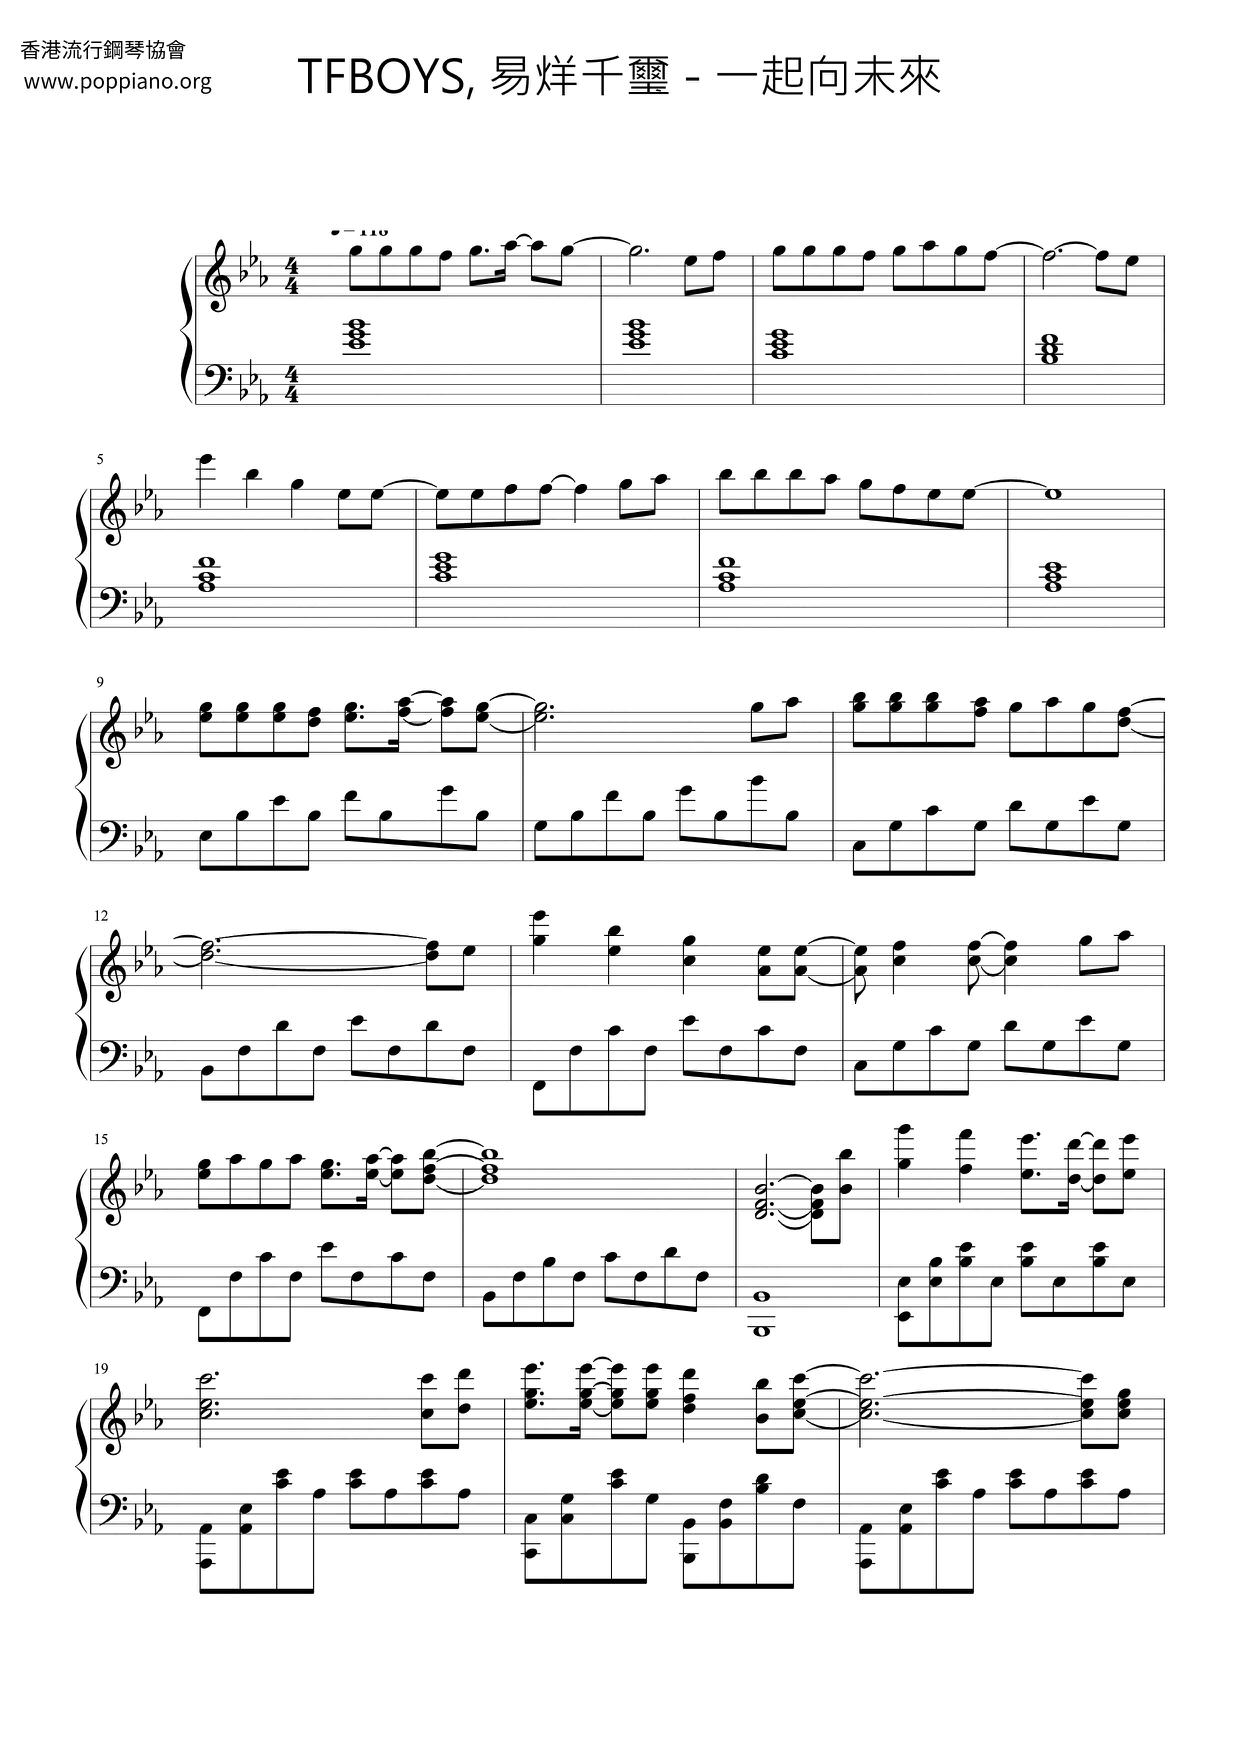 Towards The Future Together Score